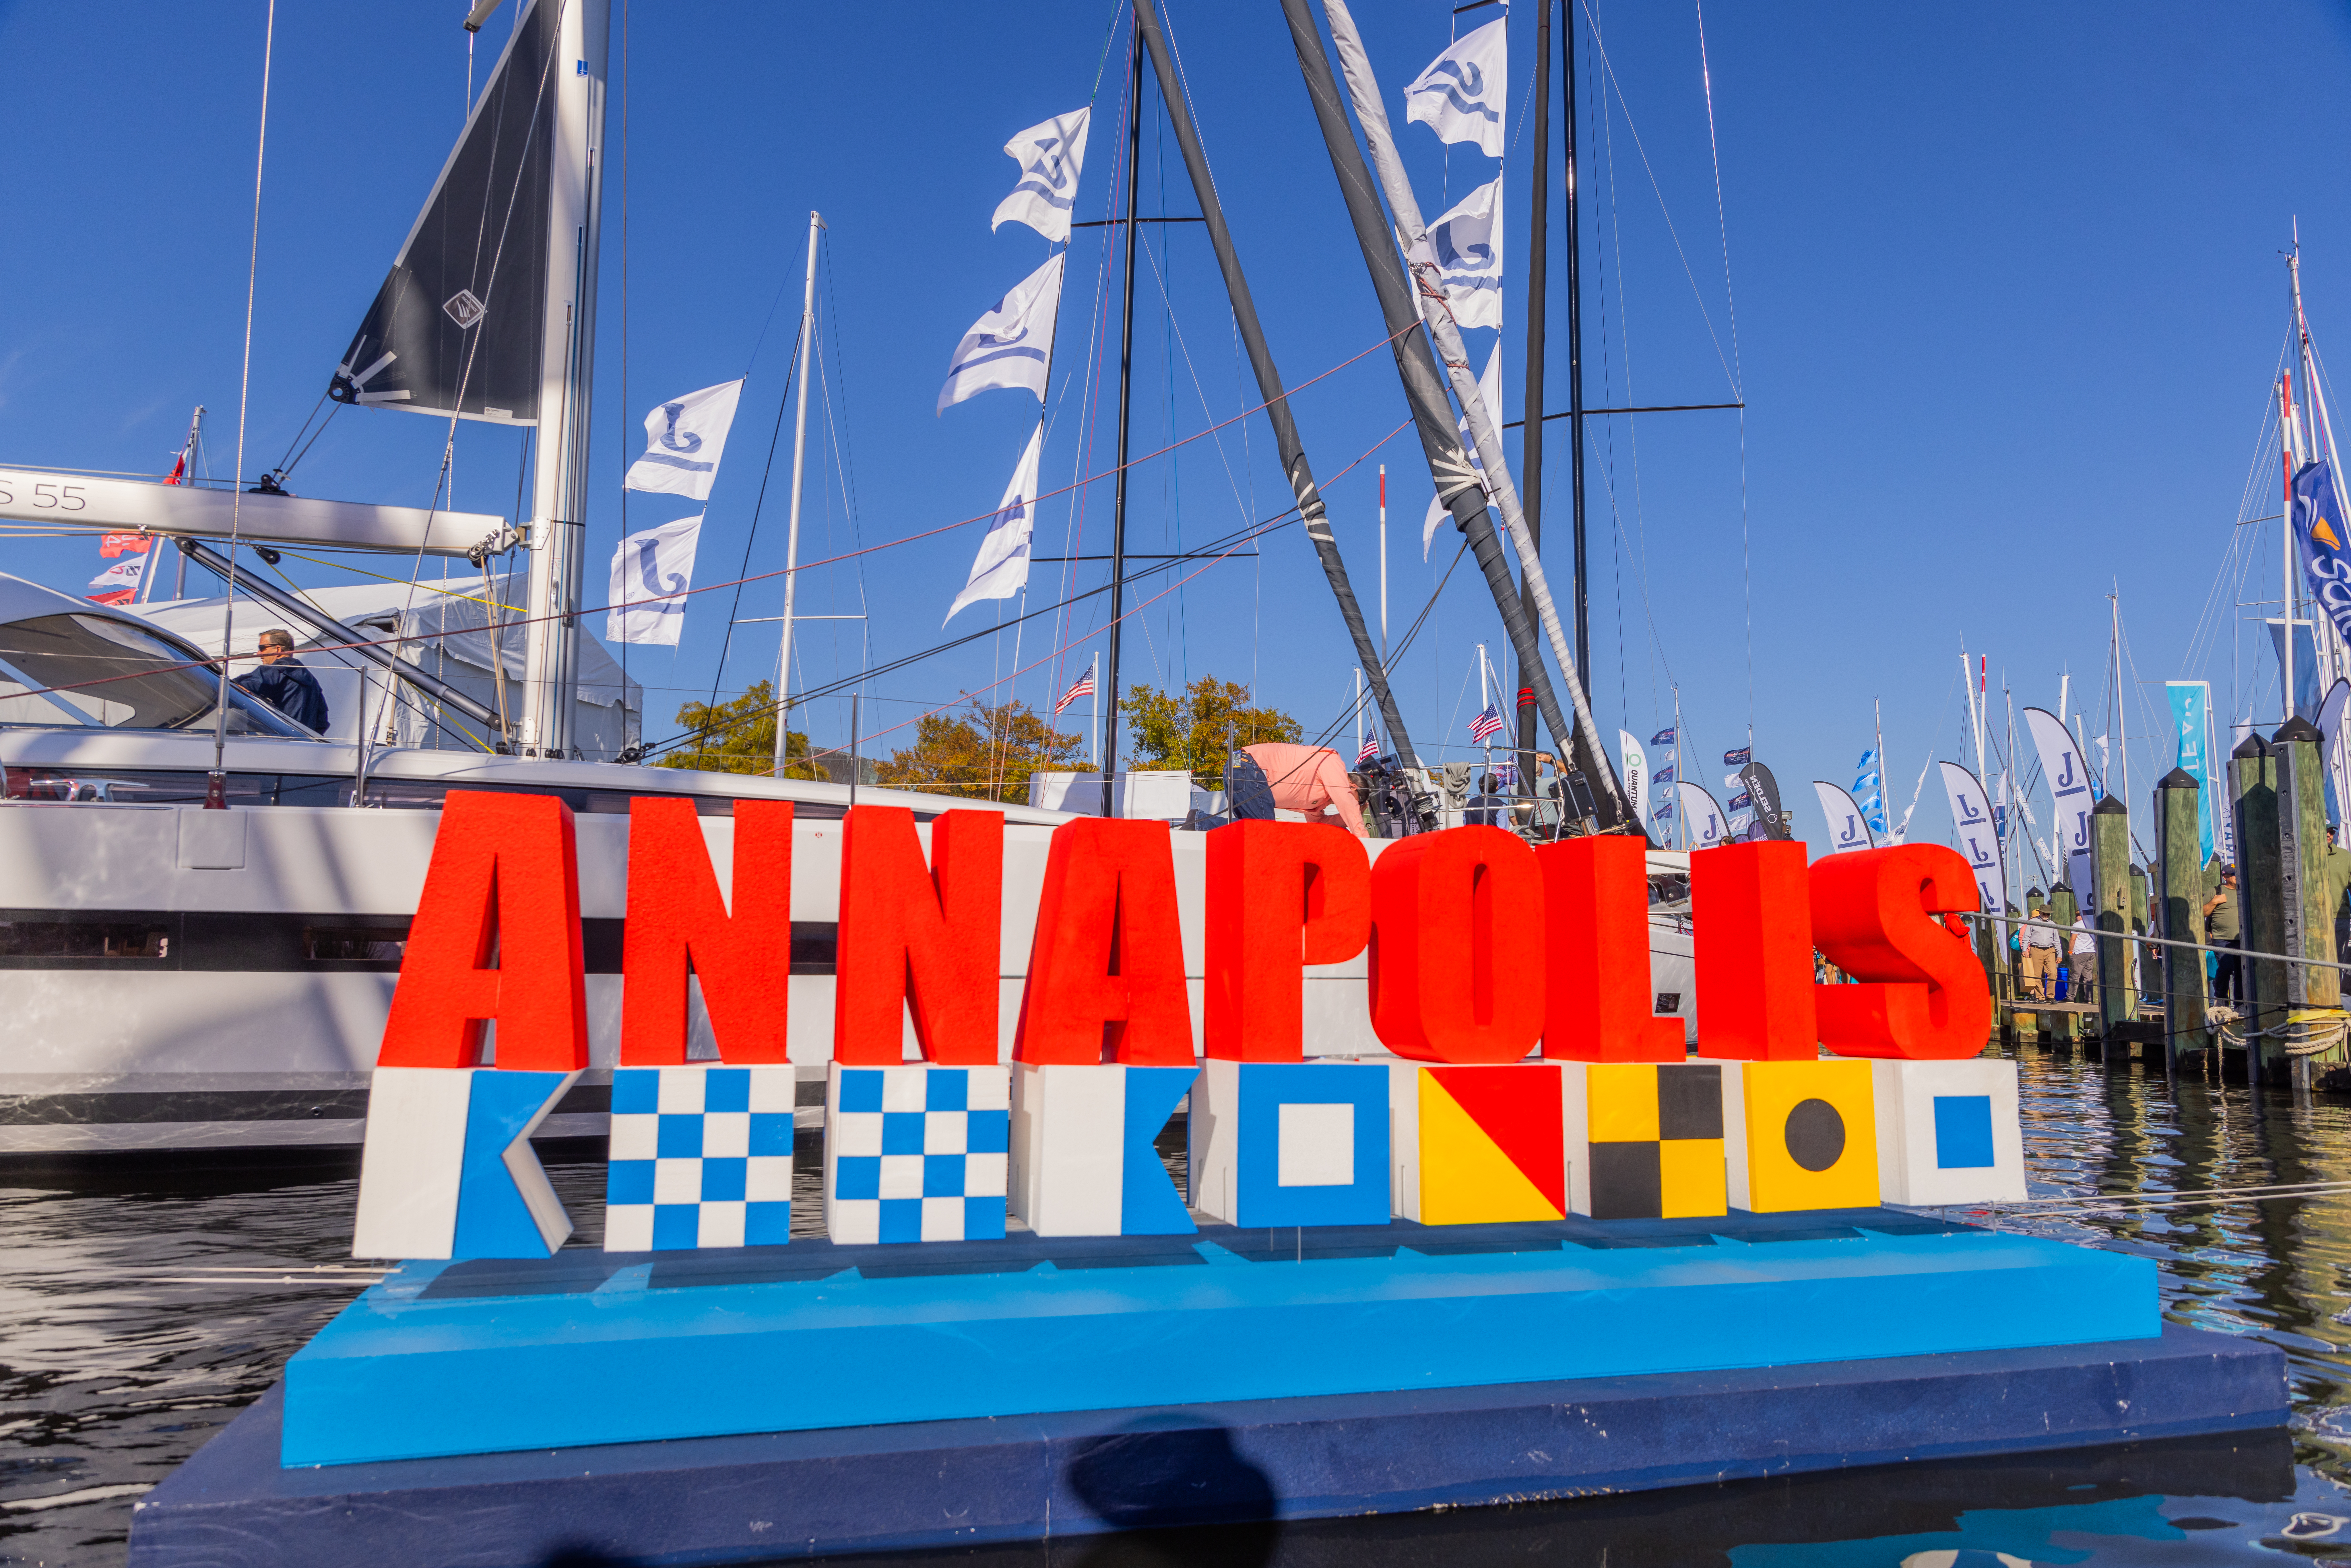 Annapolis sign at the US sailboat show in Annapolis, MD